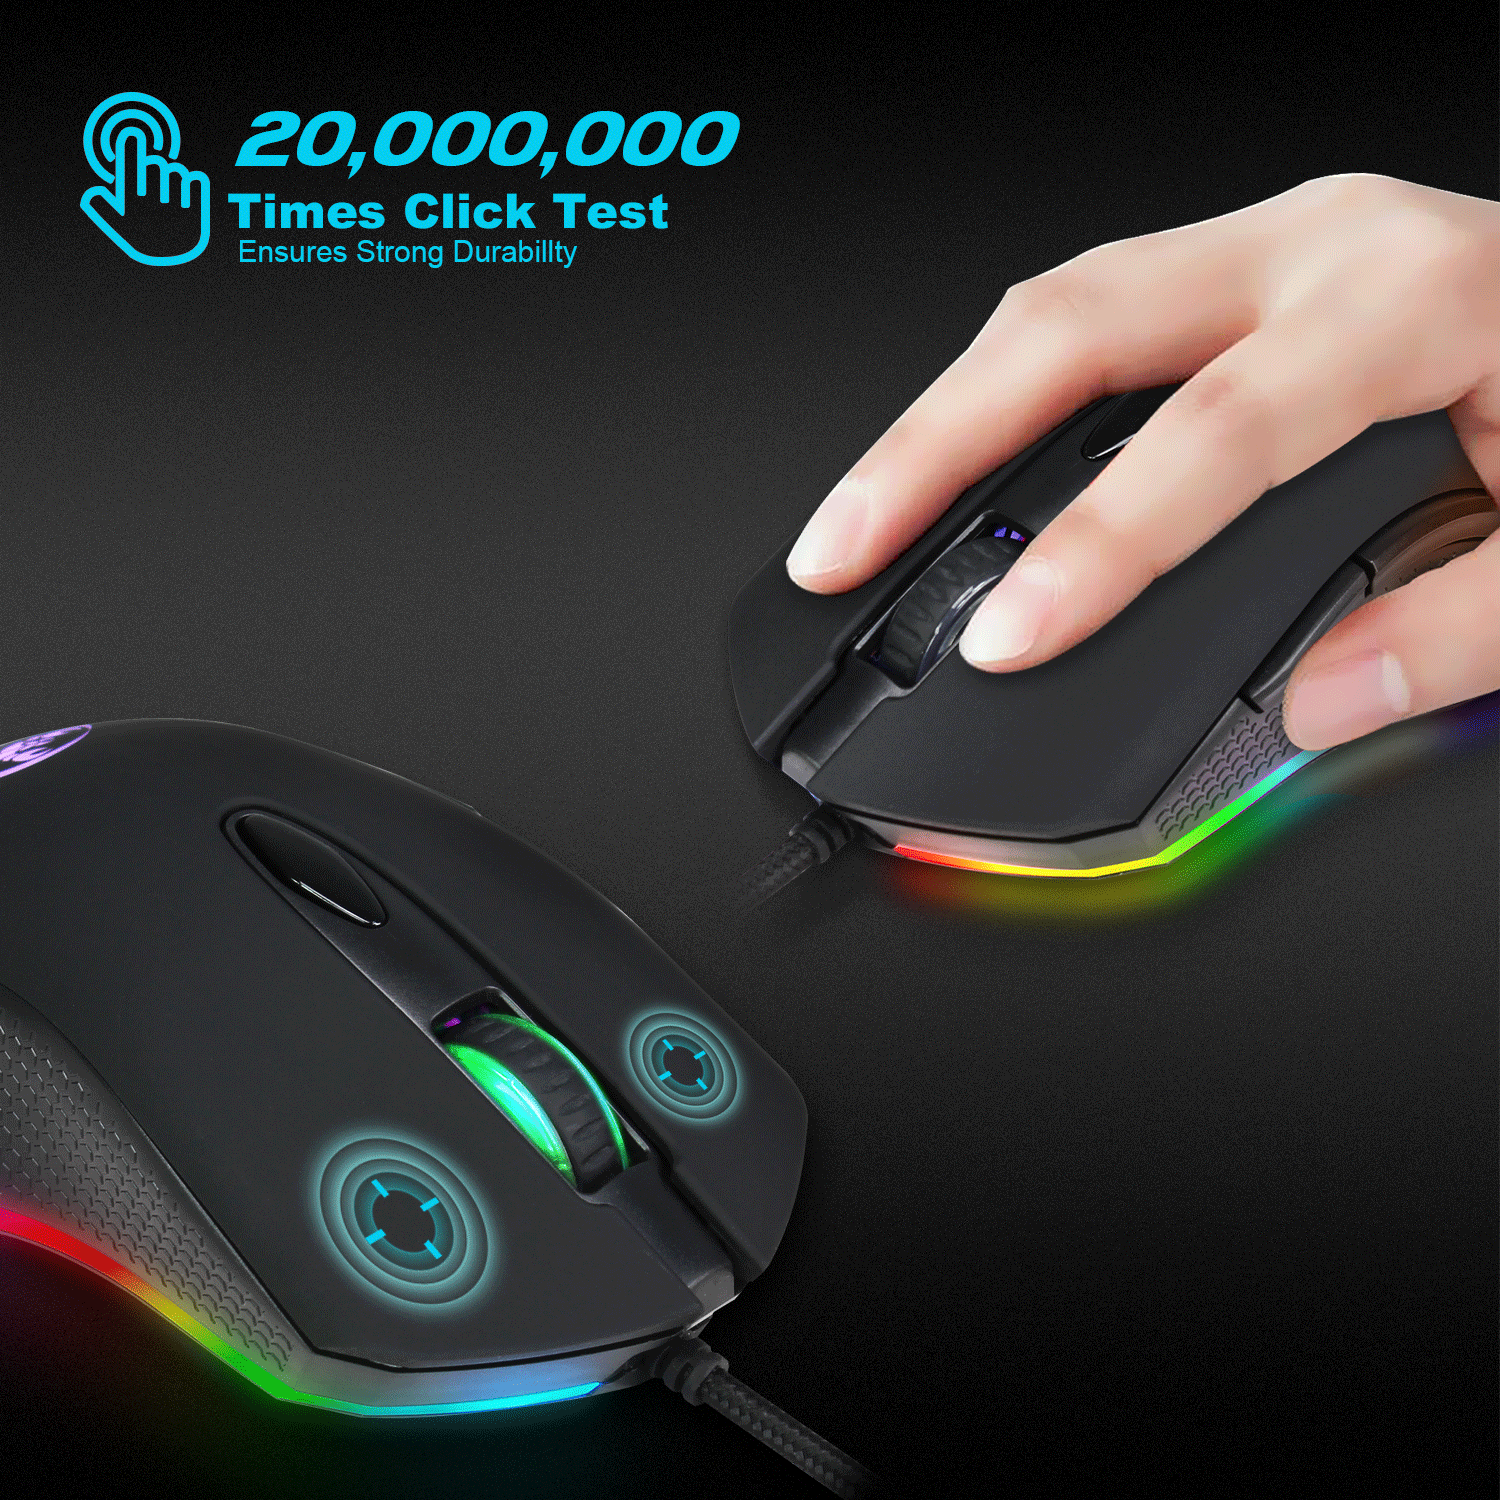 HXSJ S500 RGB Backlit Gaming Mouse 6 Buttons 4800DPI Optical USB Wired Mice Macros Define 14